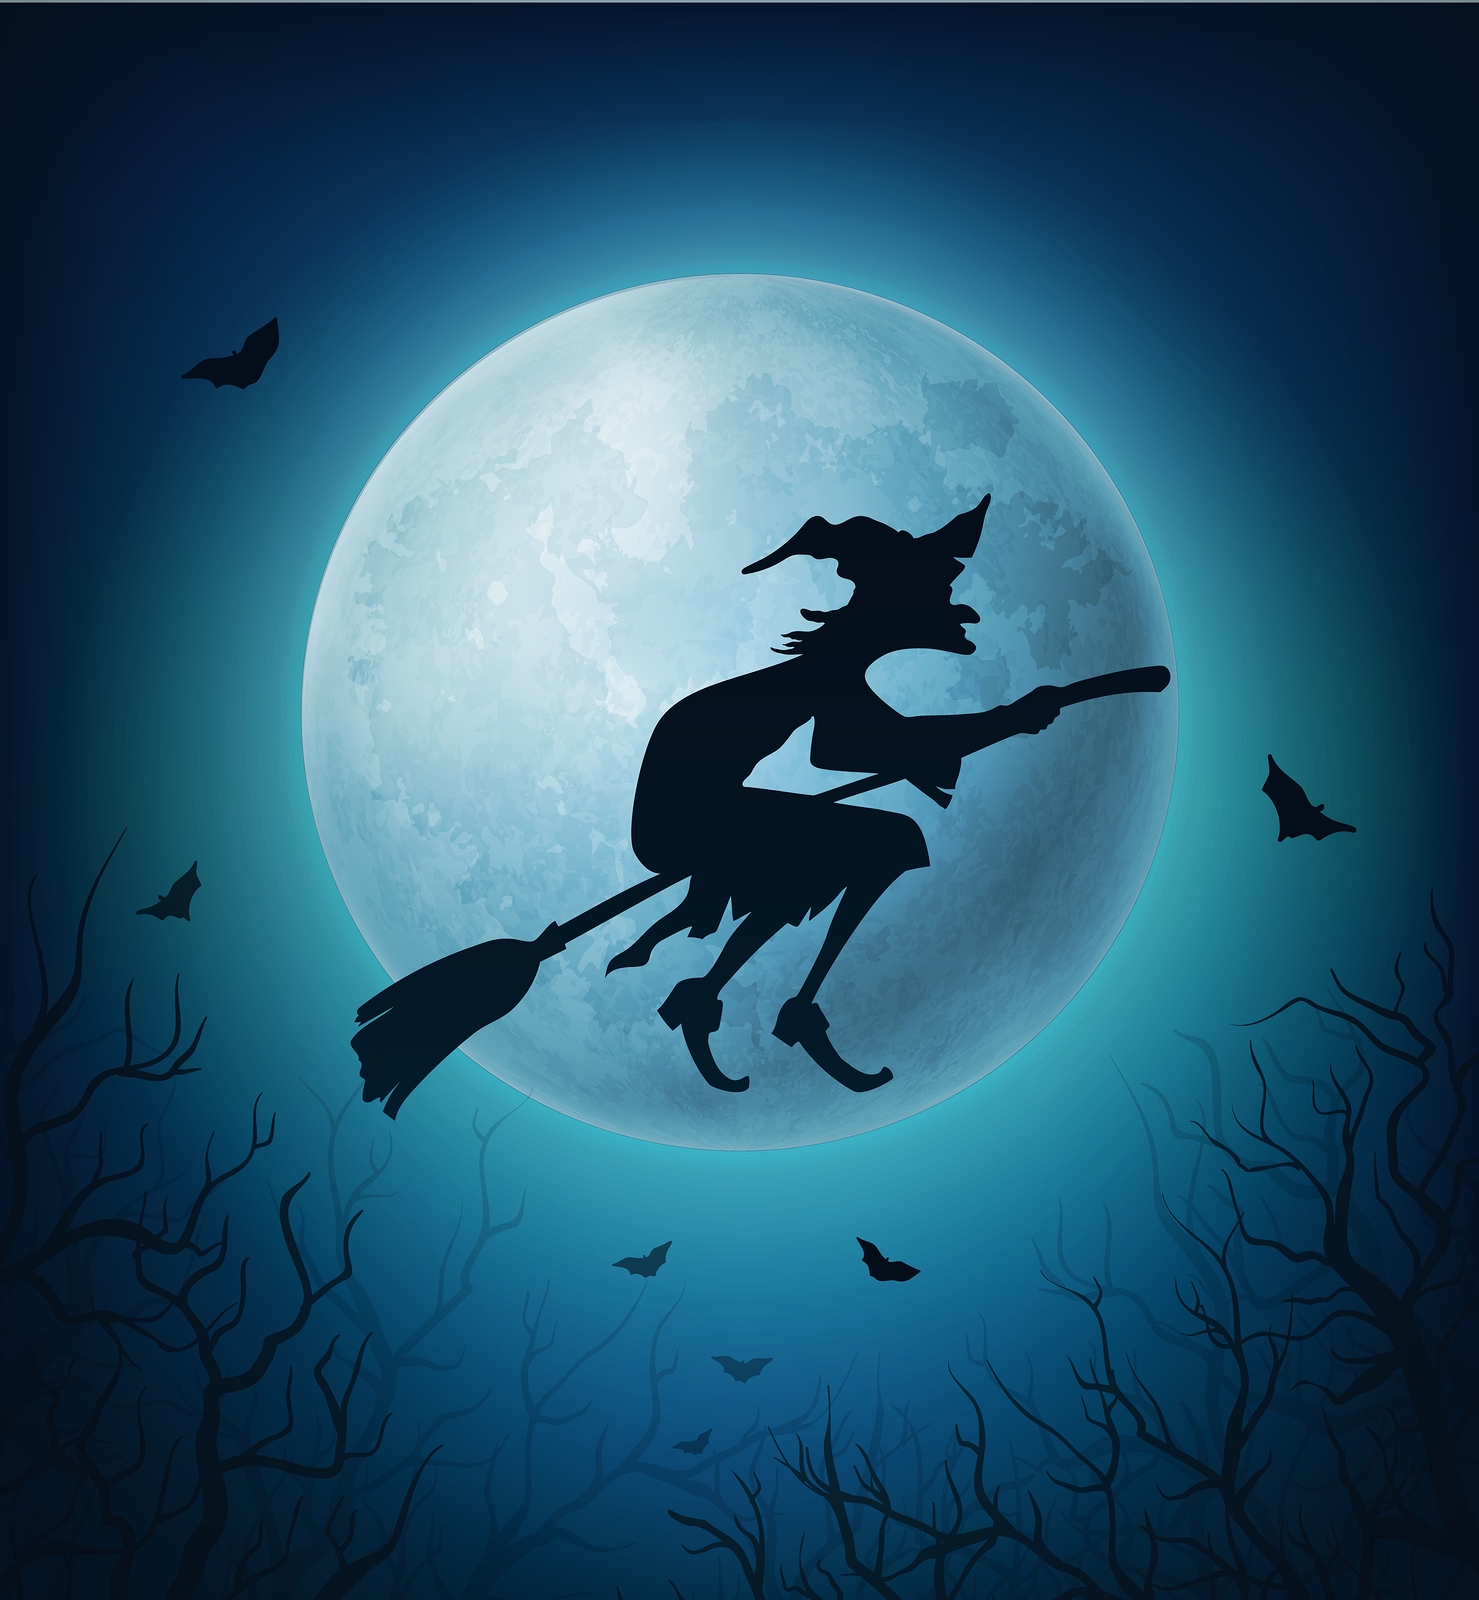 Witch flying on broom in Halloween horror night sky. Black silhouette of evil woman on broomstick against full moon, bats and spooky tree branches. Halloween autumn holiday vector theme